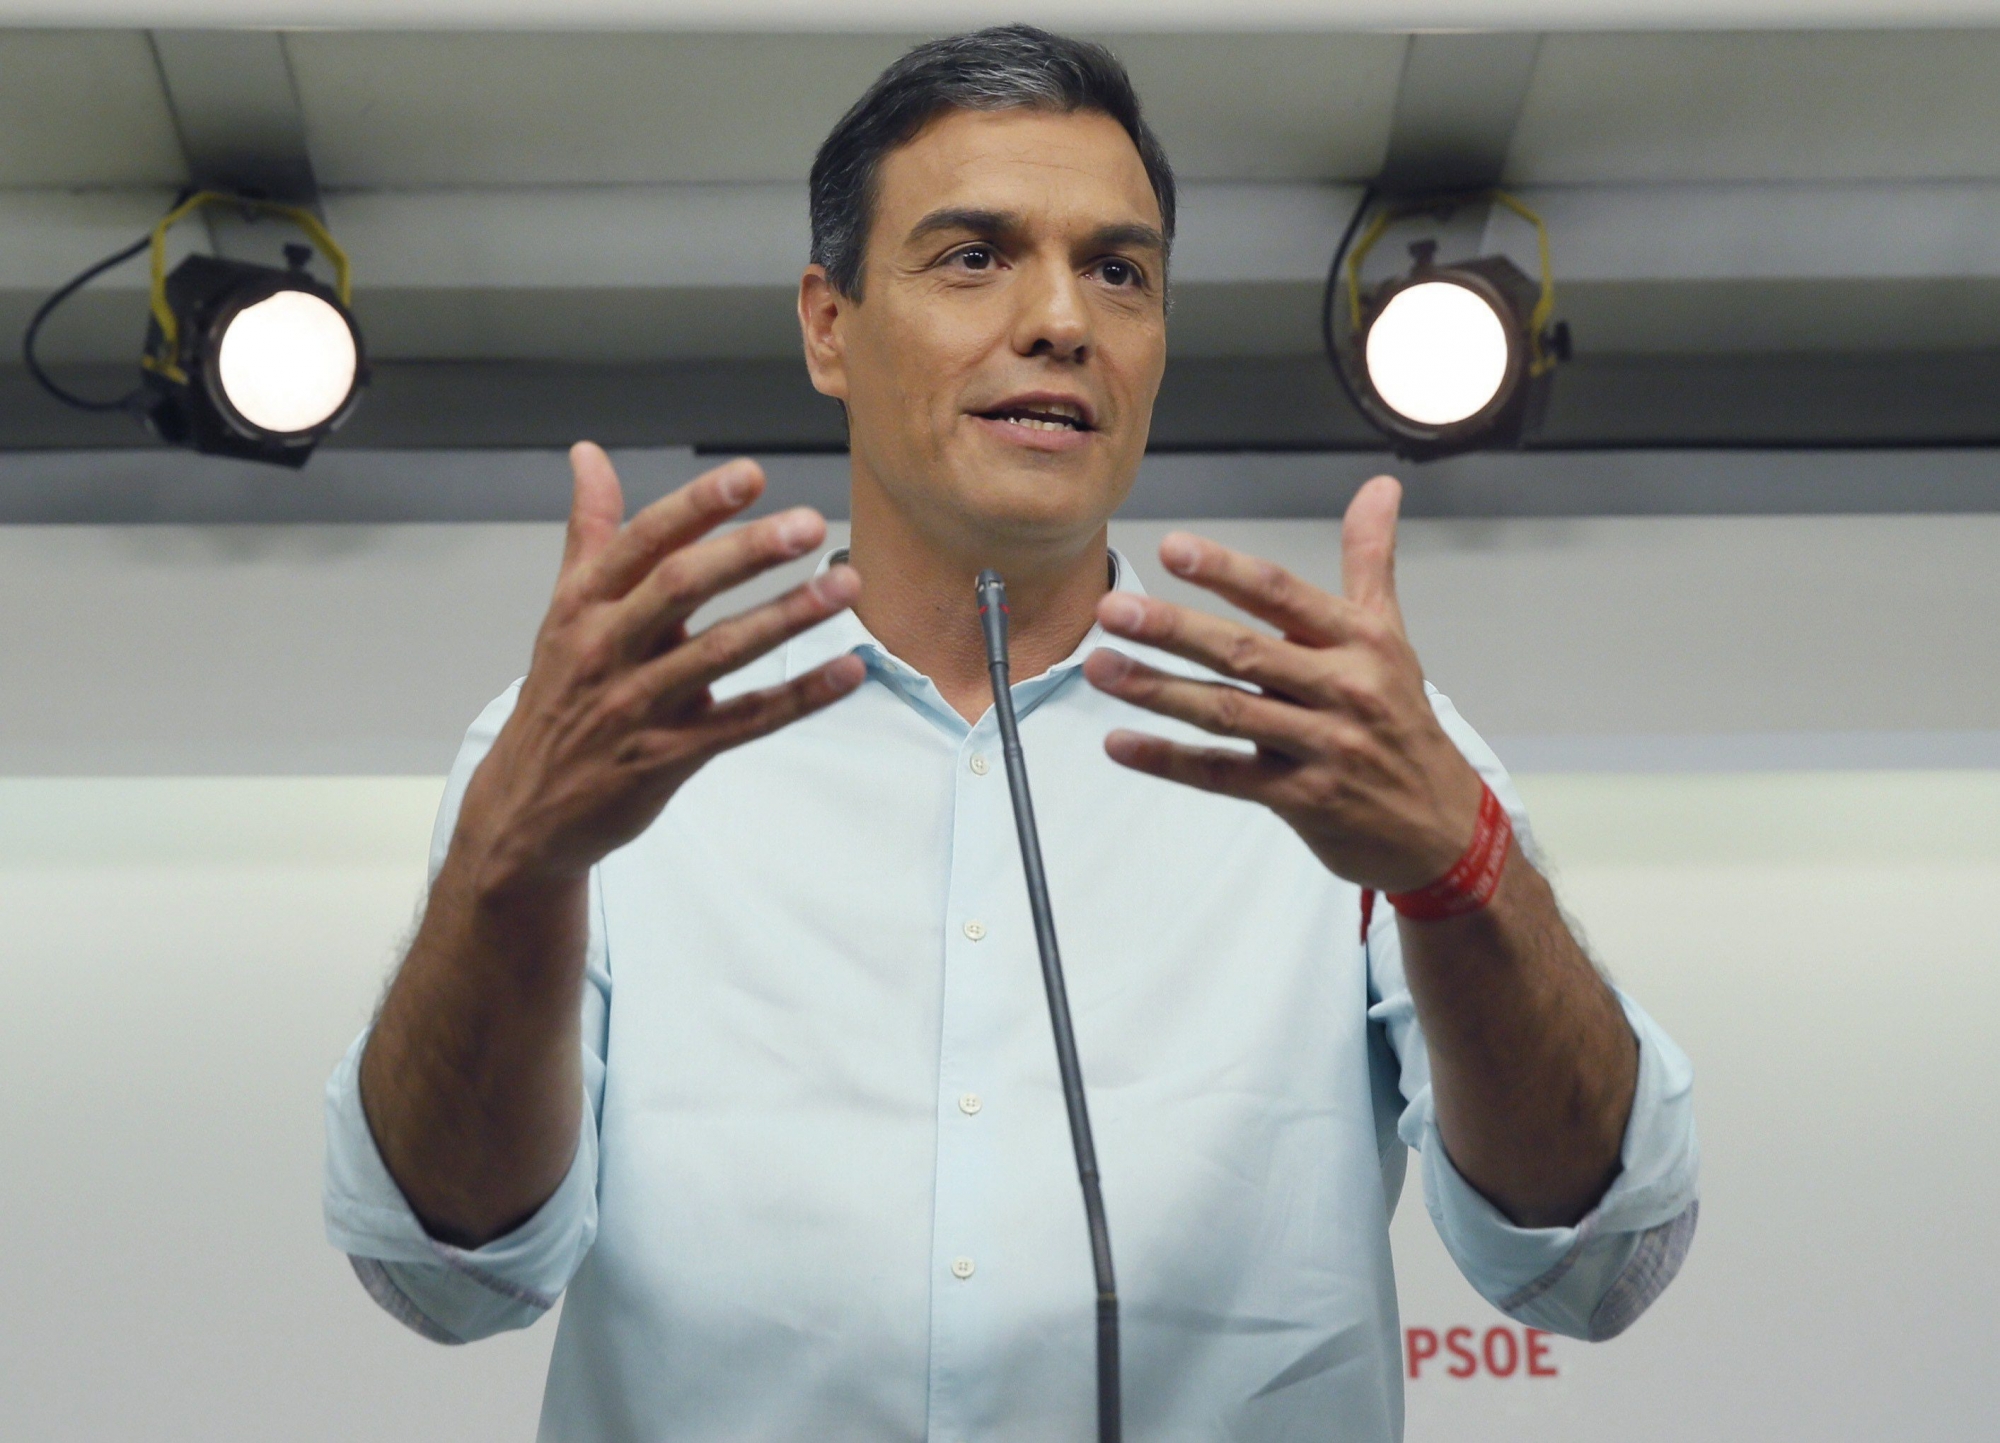 epa05966264 Candidate for the socialist party PSOE primary elections Pedro Sanchez gives s press conference before take part into the debate with the others candidate at the party's headquarters in Madrid, Spain, on 15 May 2017. PSOE members will vote for their new general secretary on 21 May 2017.  EPA/MARISCAL SPAIN PARTIES